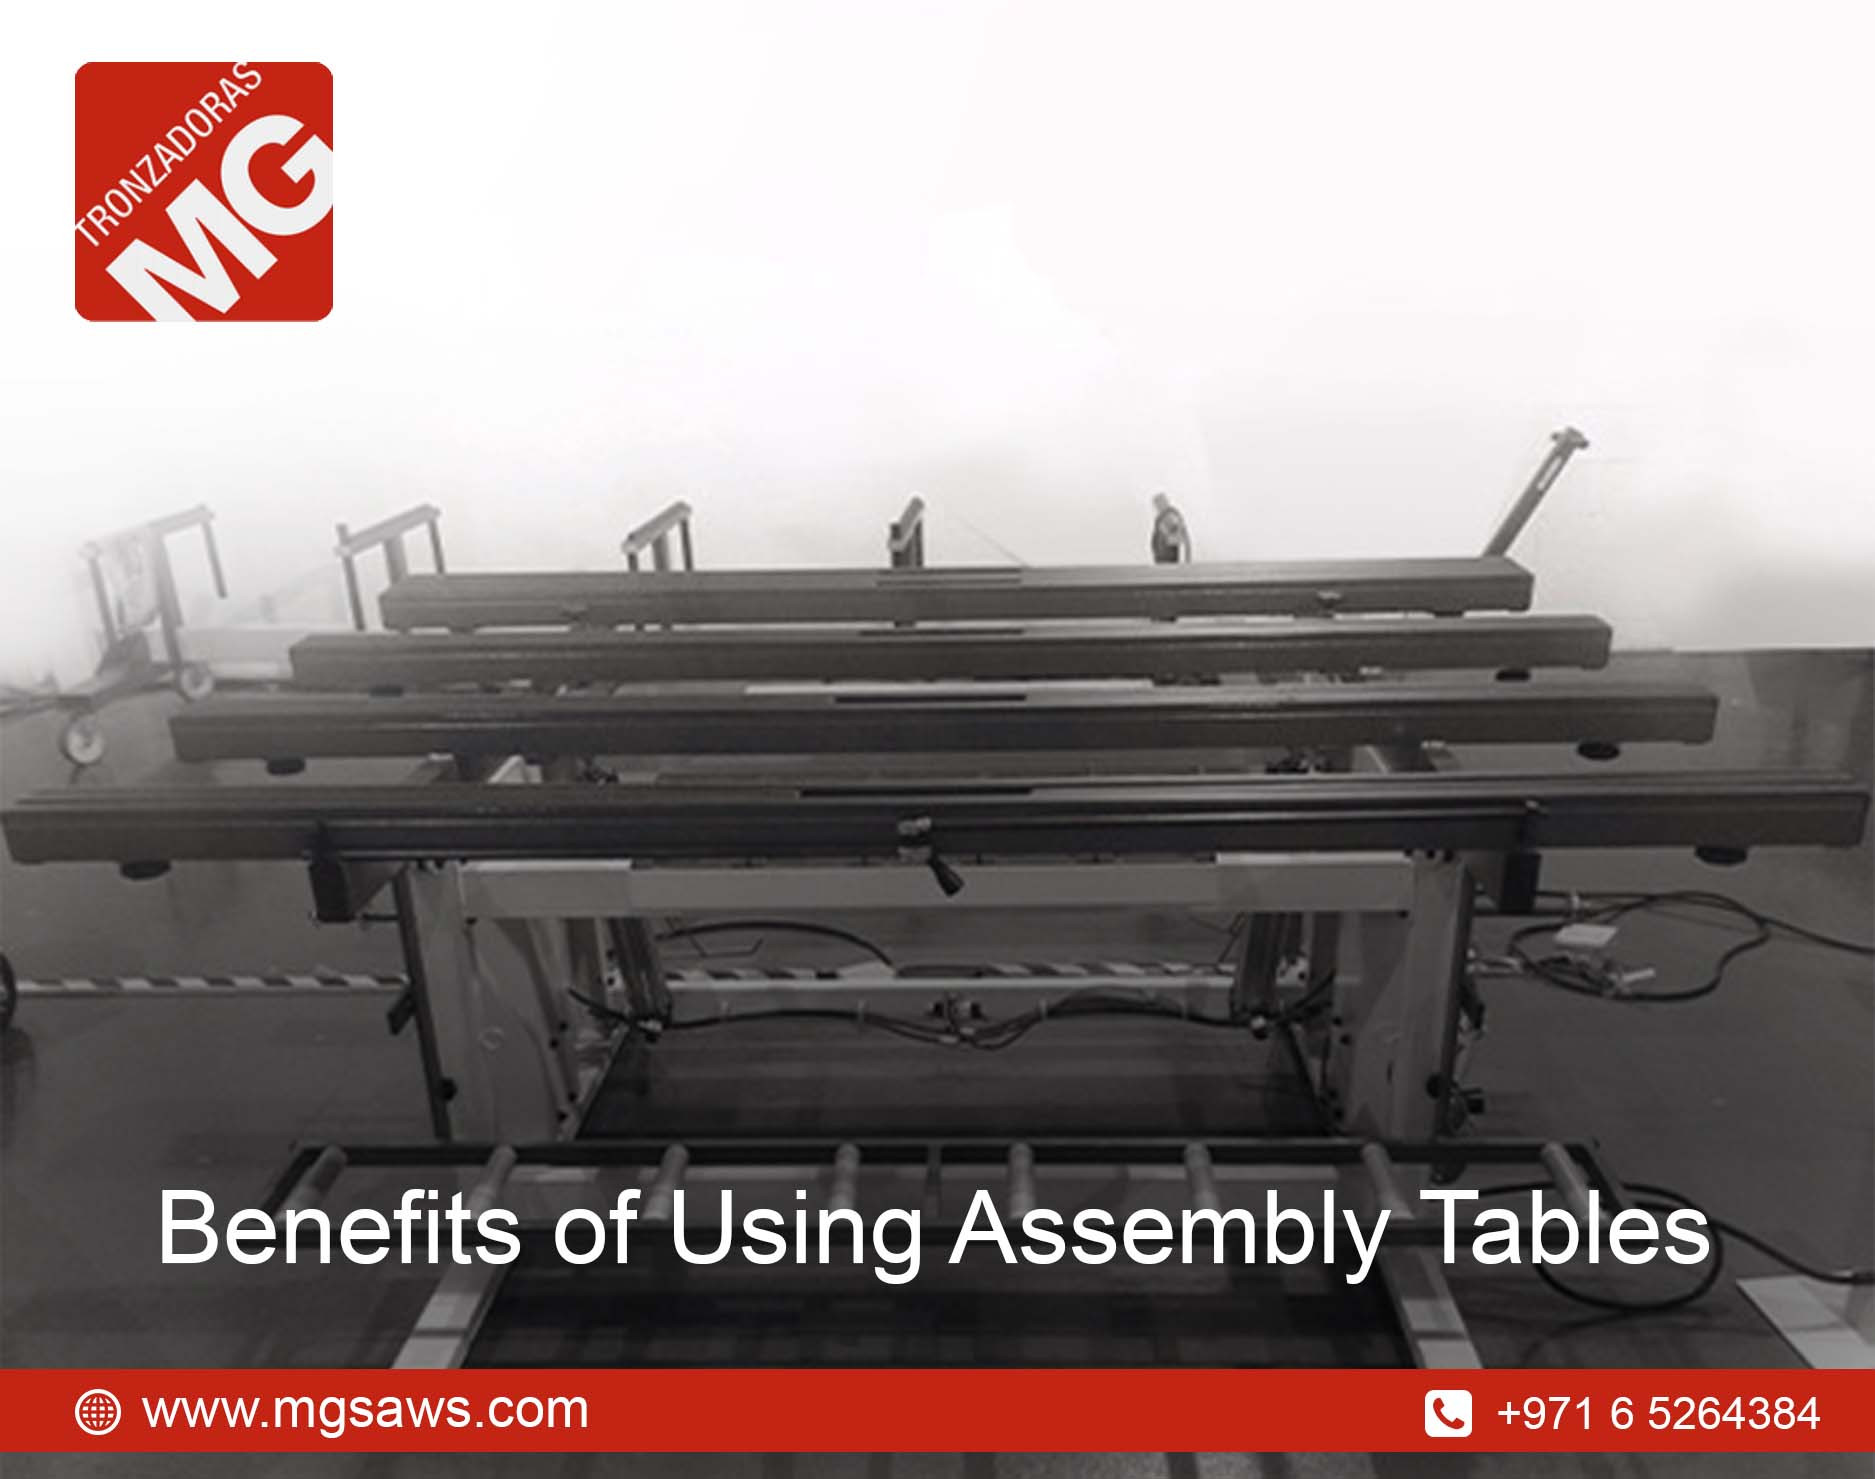 Benefits of Using Assemly Tables